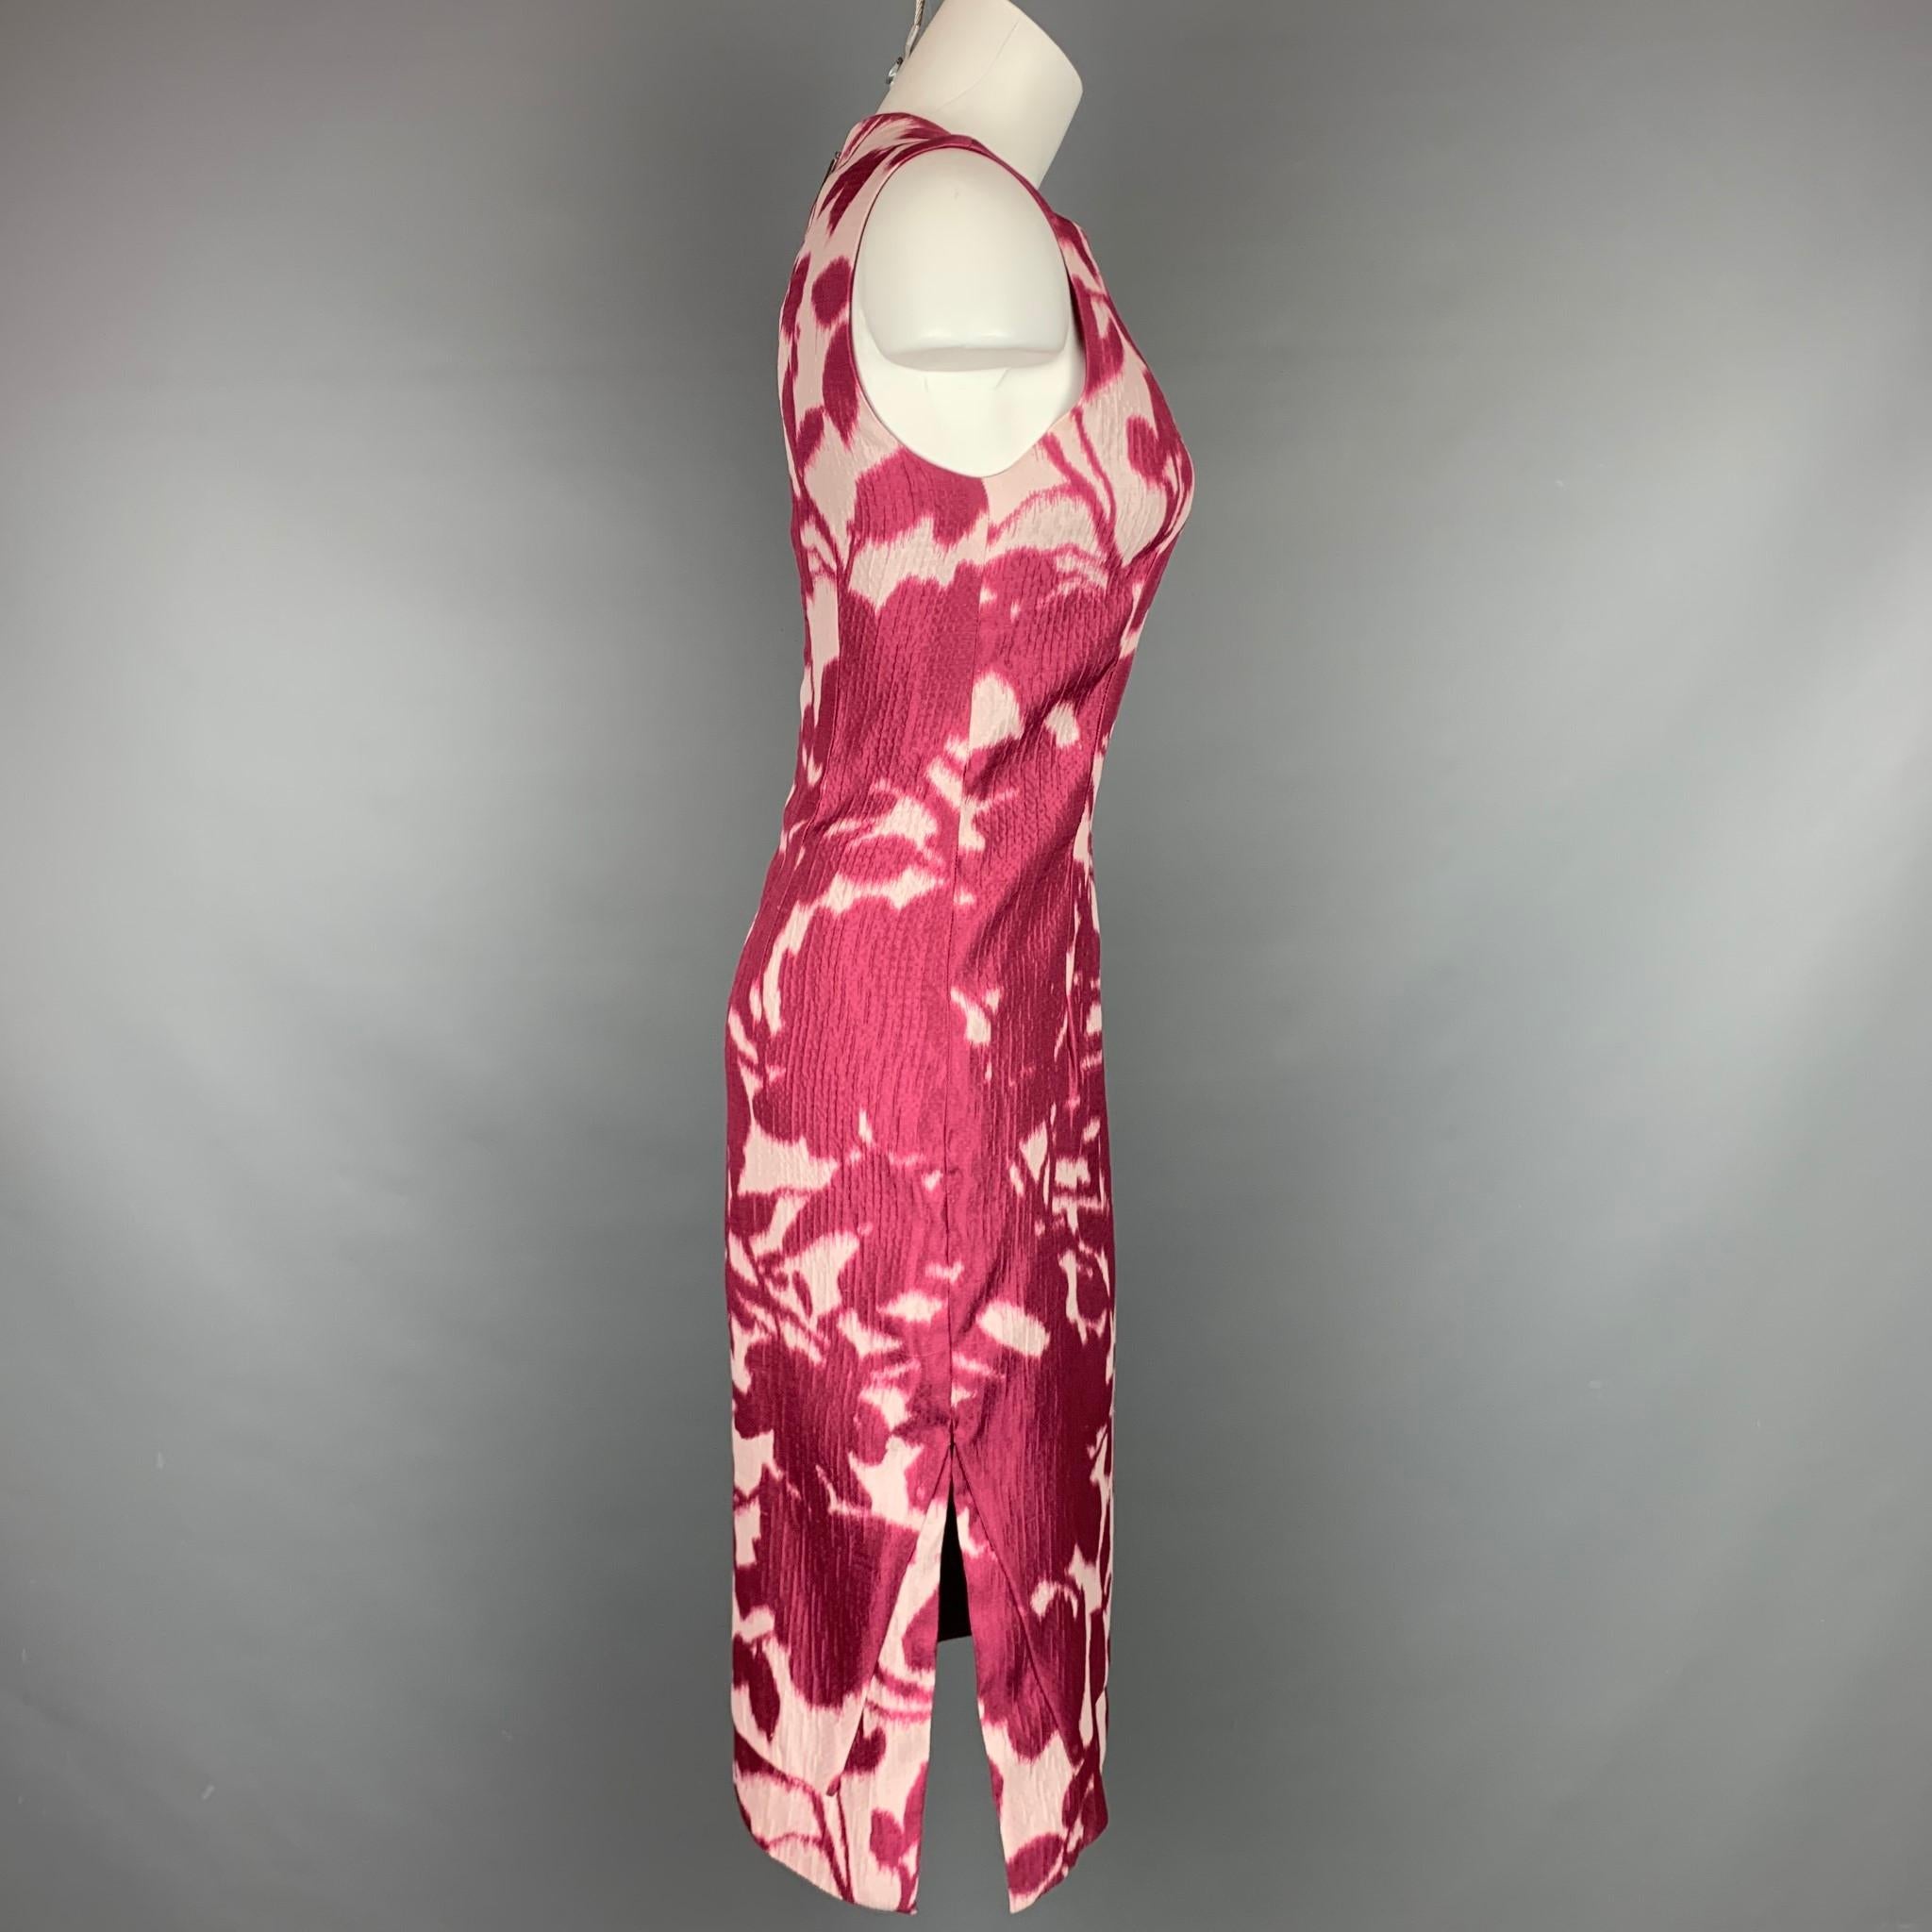 PRABAL GURUNG dress comes in a burgundy & white silk featuring a shift style, sleeveless, single slit, and a back zipper closure. Made in NY.

Very Good Pre-Owned Condition.
Marked: 2

Measurements:

Bust: 32 in.
Waist: 28 in.
Hip: 35 in.
Length: 41